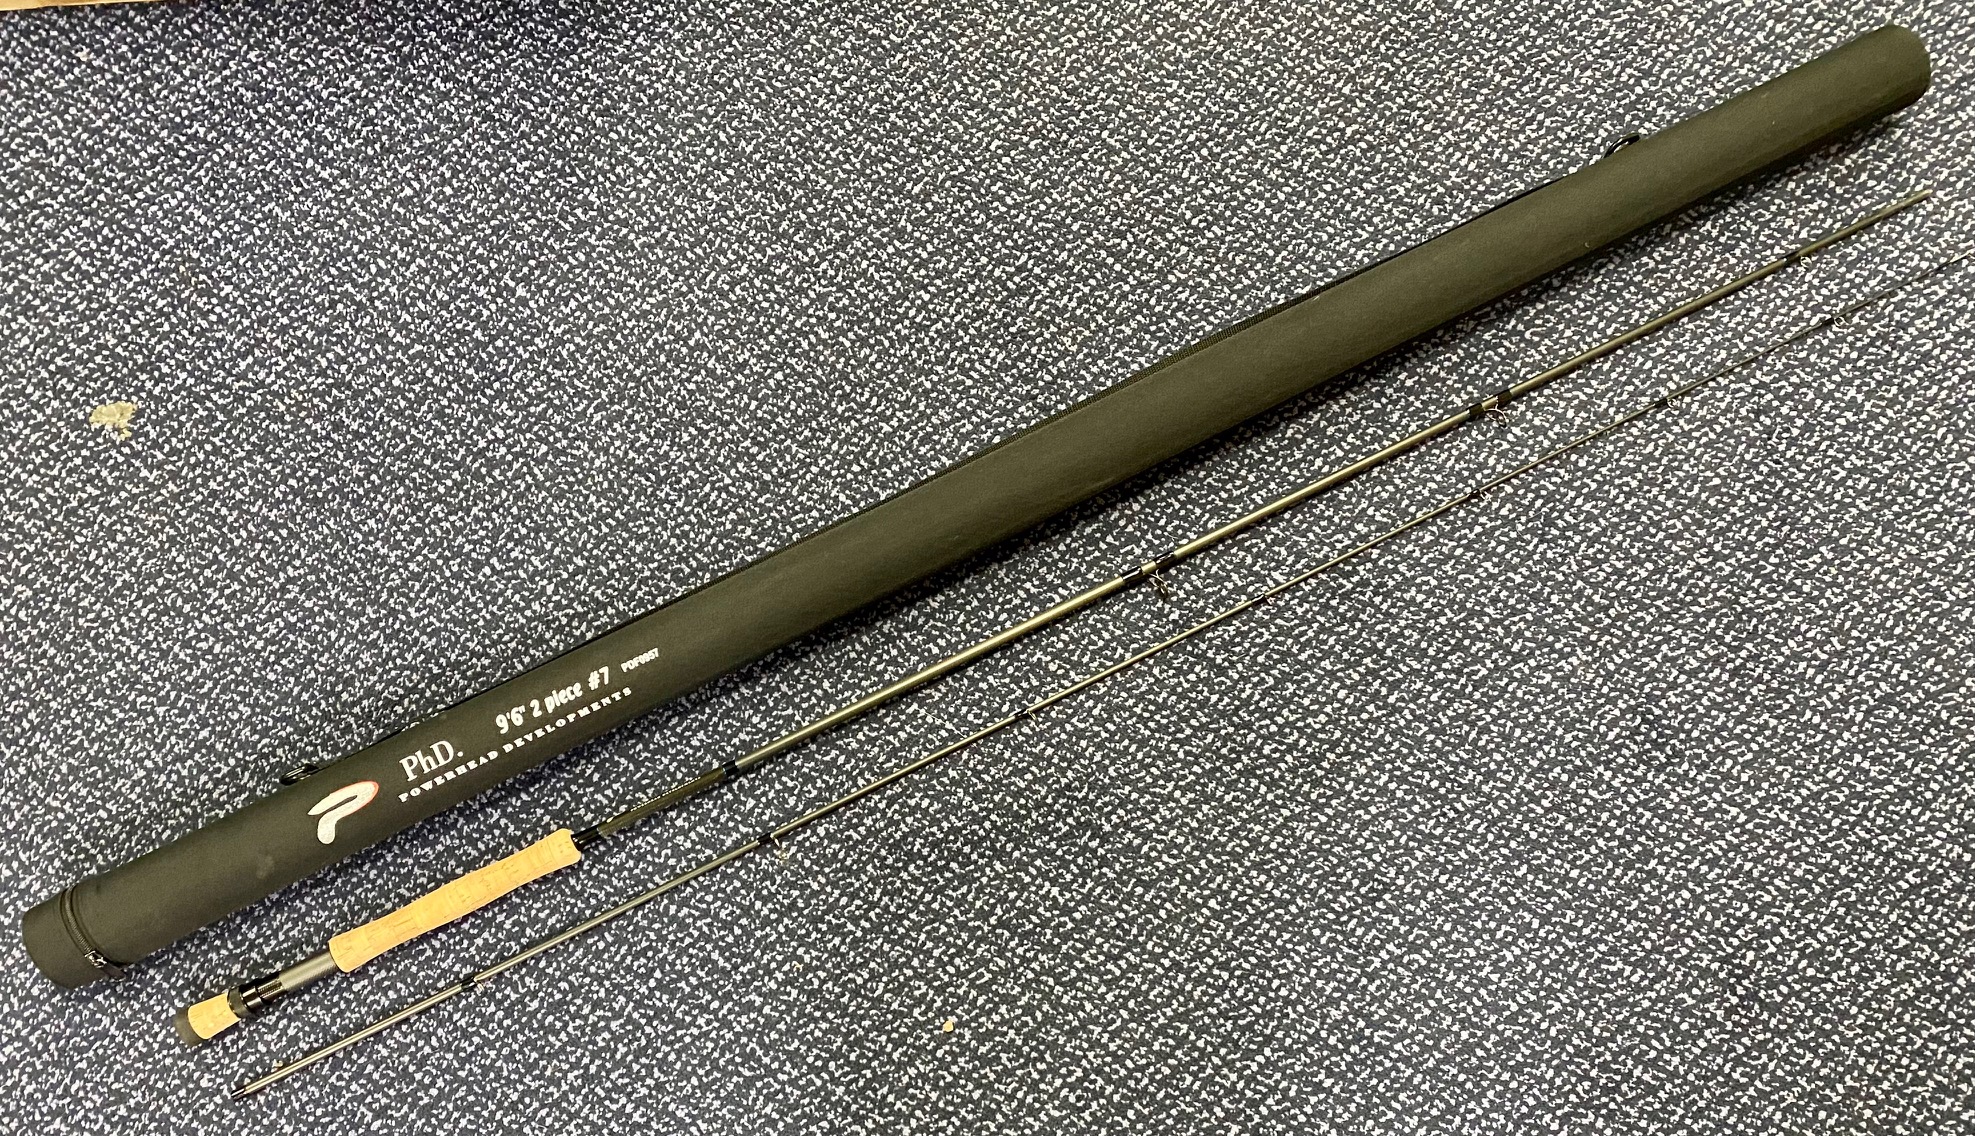 PhD. 9ft6 #7 2 piece fly rod (in tube) - Used